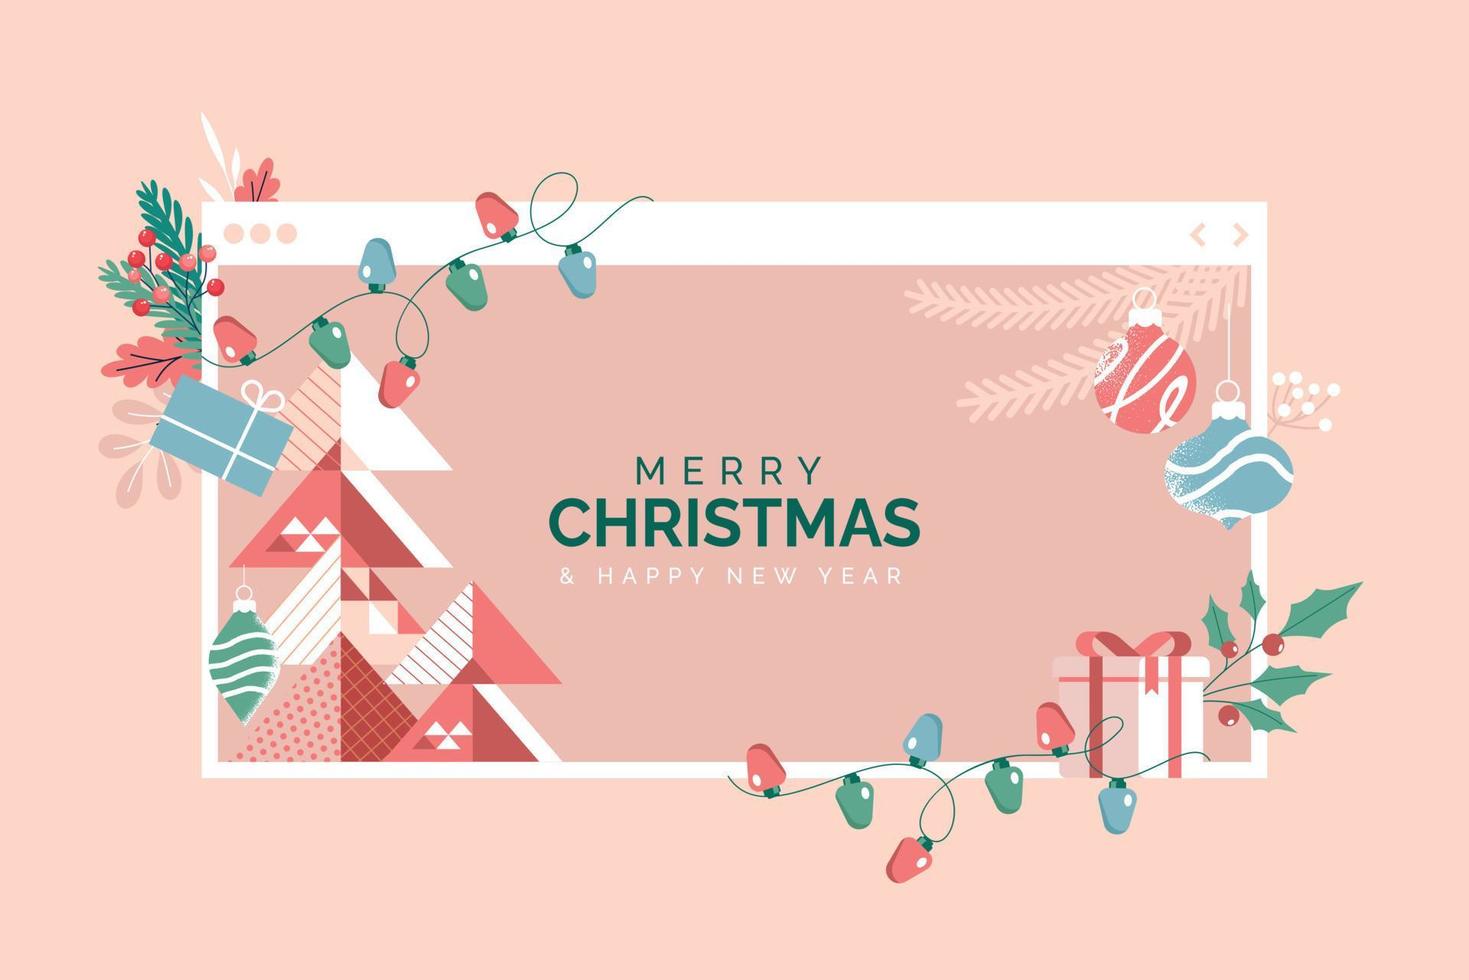 Christmas and New Year greeting card. Modern vector illustration concept for greeting card, website and mobile website banner, party invitation card, posters, social media banners.